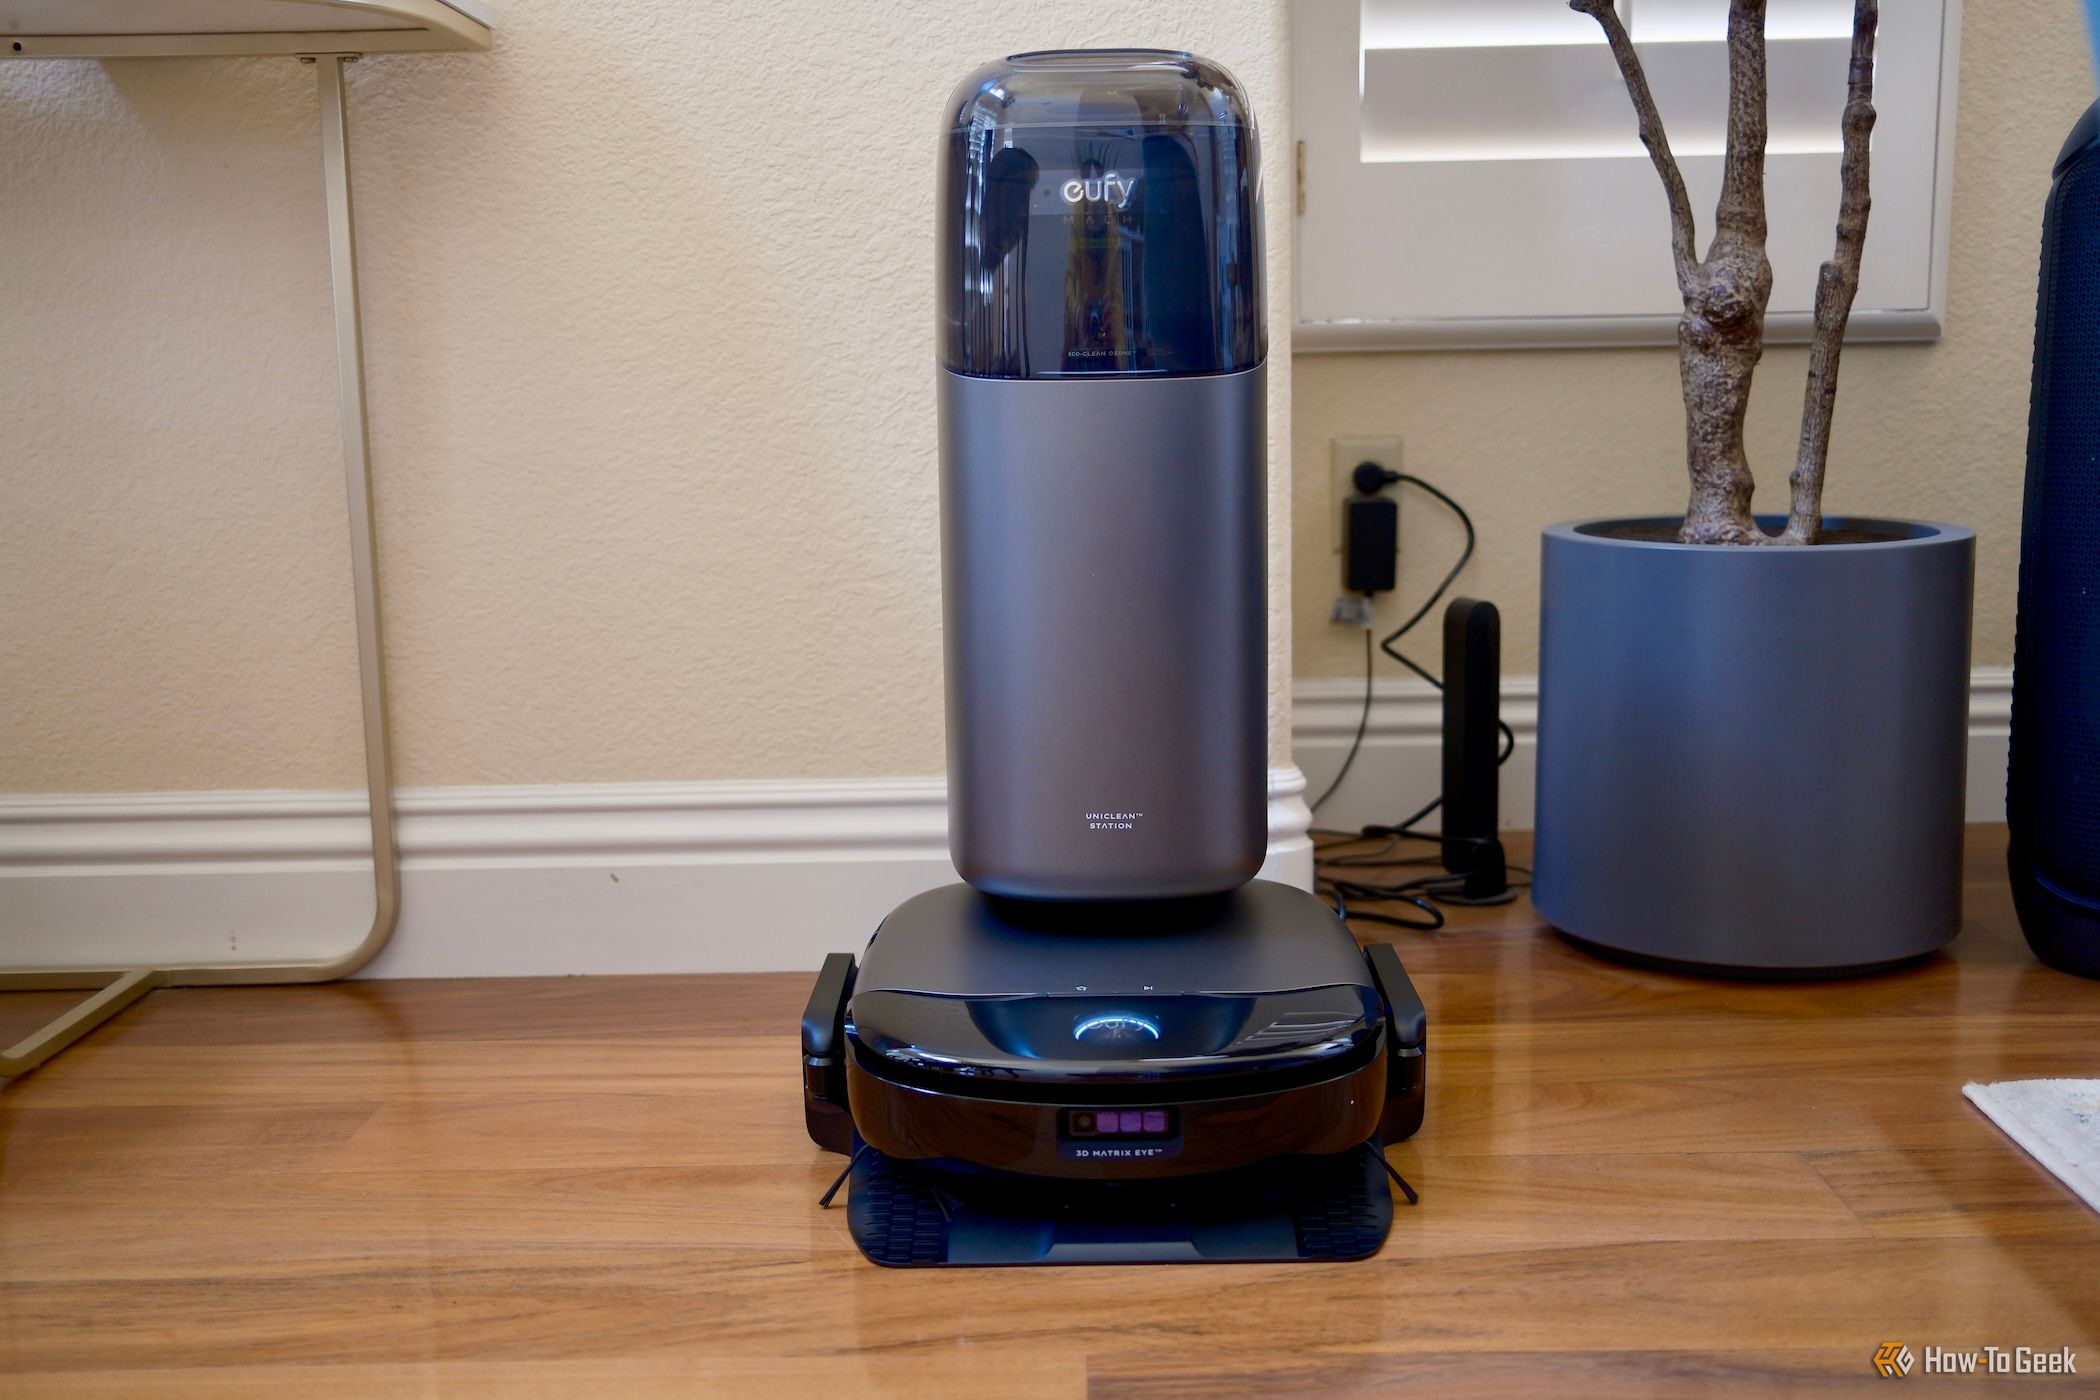 Showing theEufy S1 Pro vacuum and docking station-1